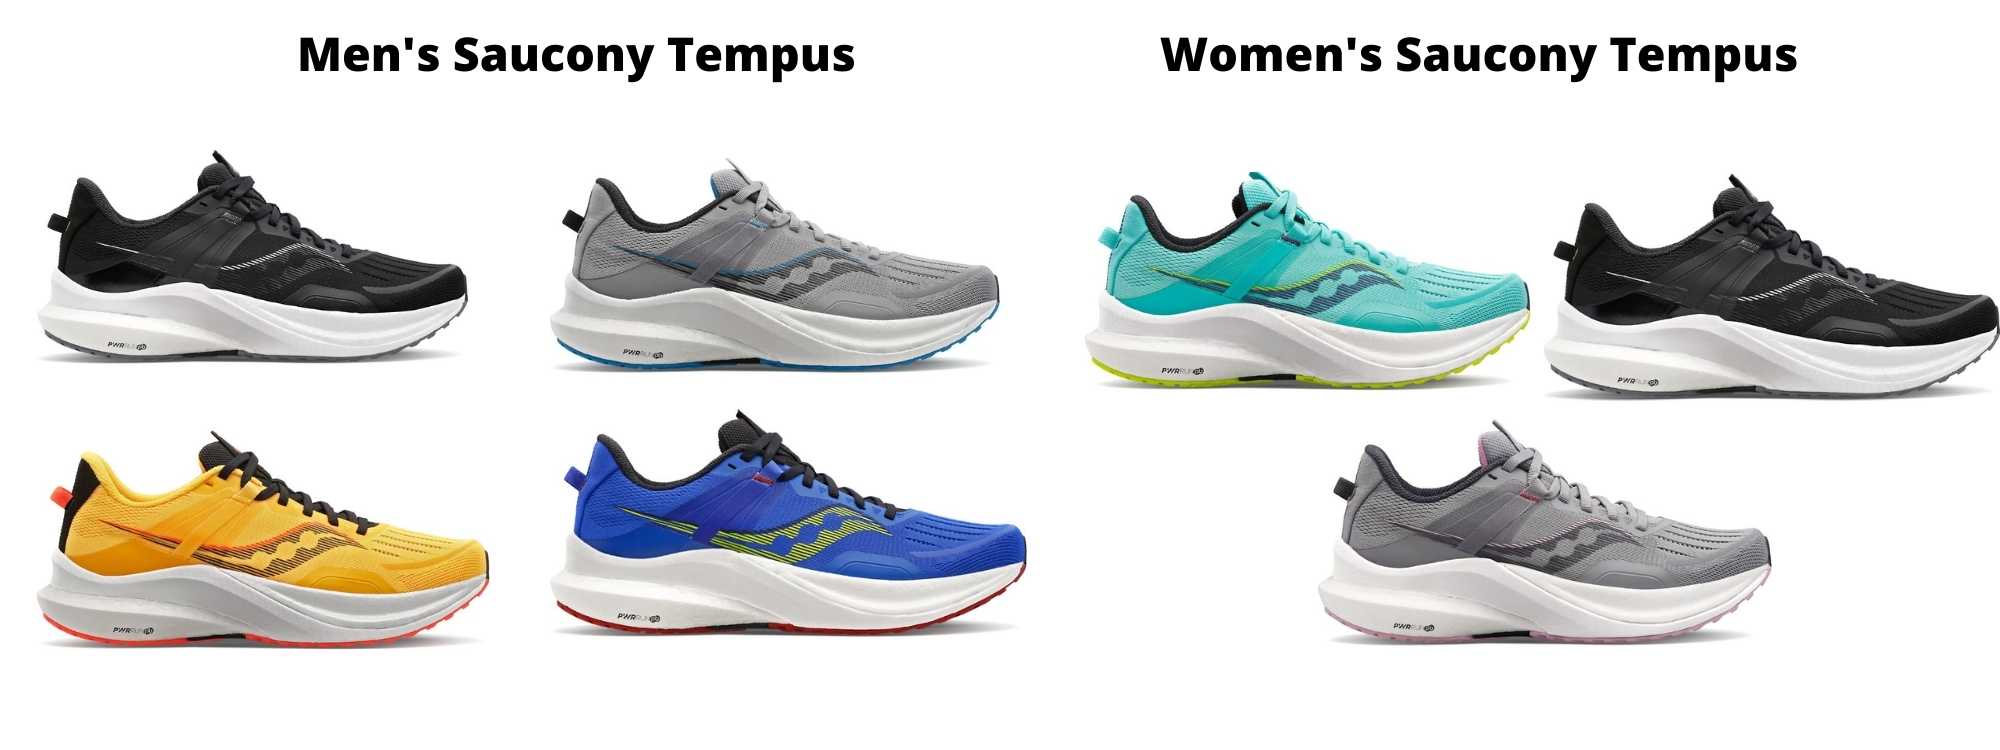 Saucony Tempus can be purchased in Kansas City from The Running Well Store